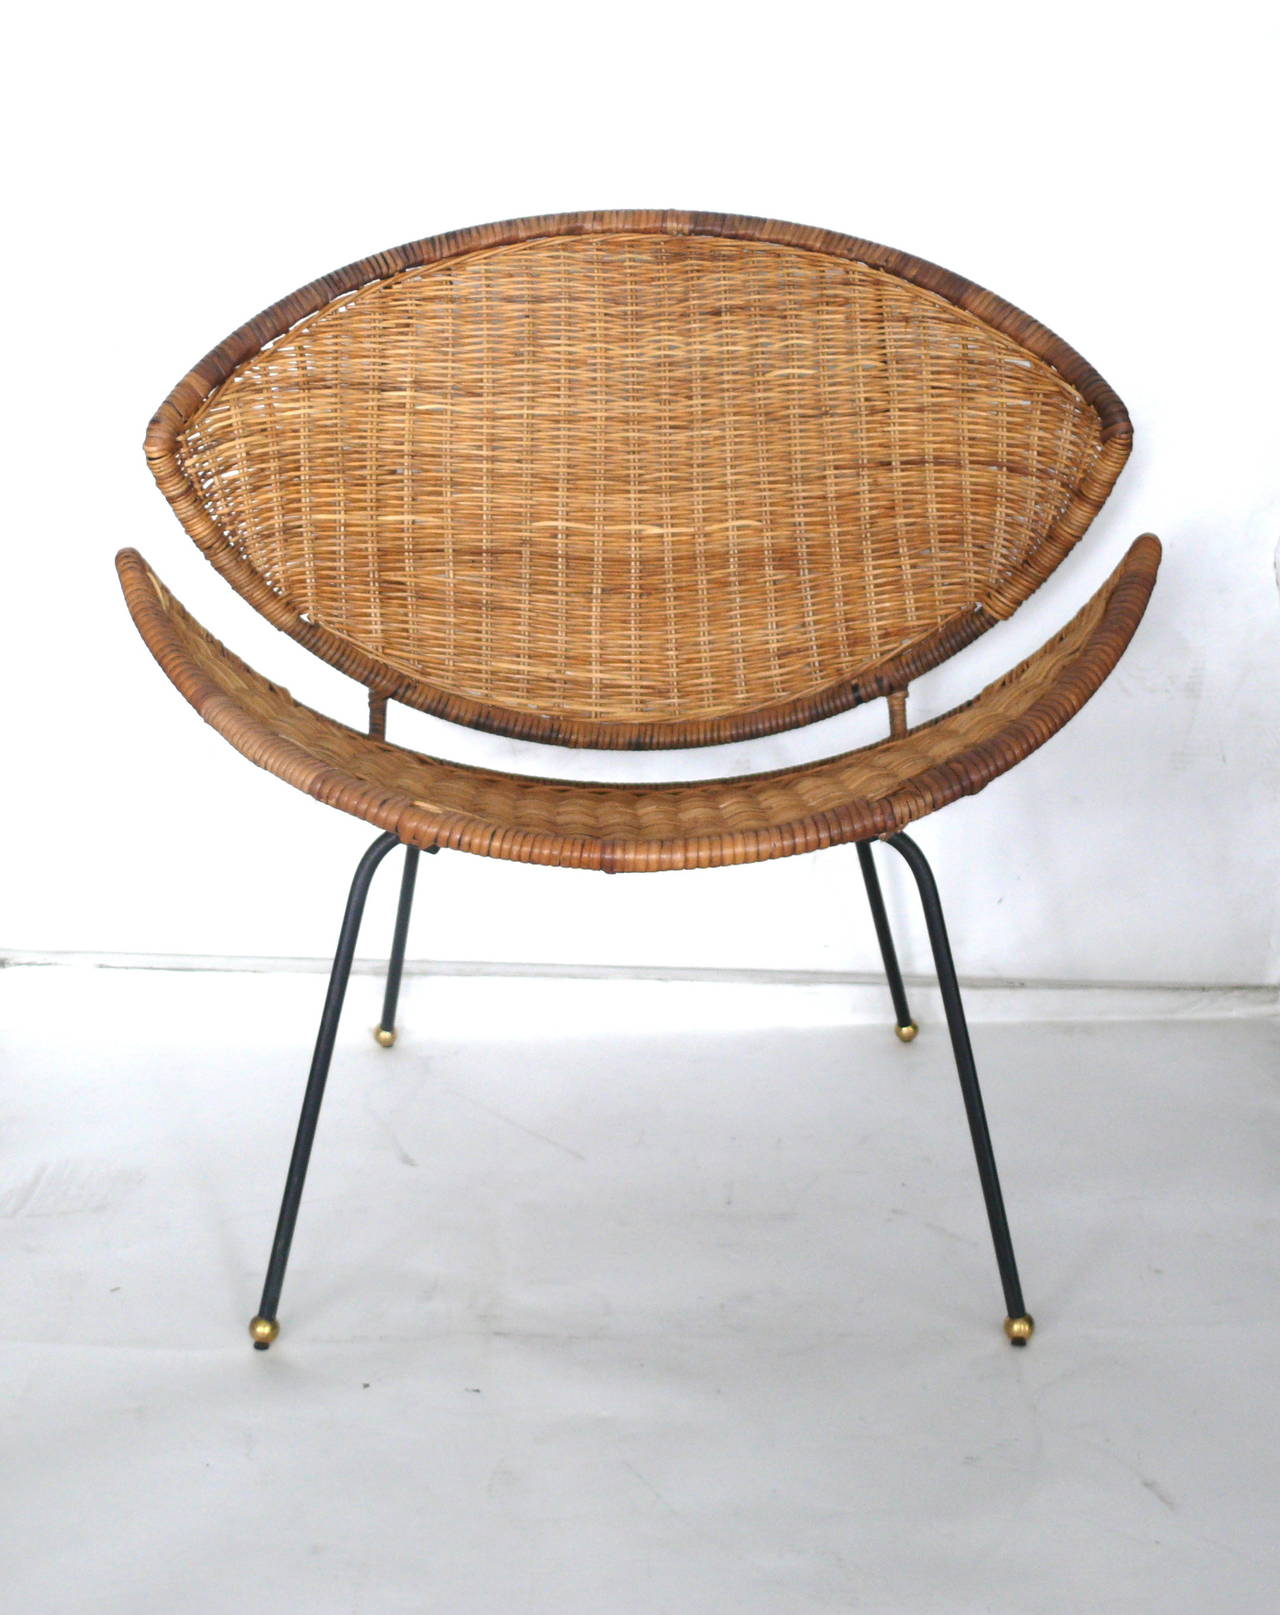 Sculptural Wicker and Rattan Clam Chairs 1